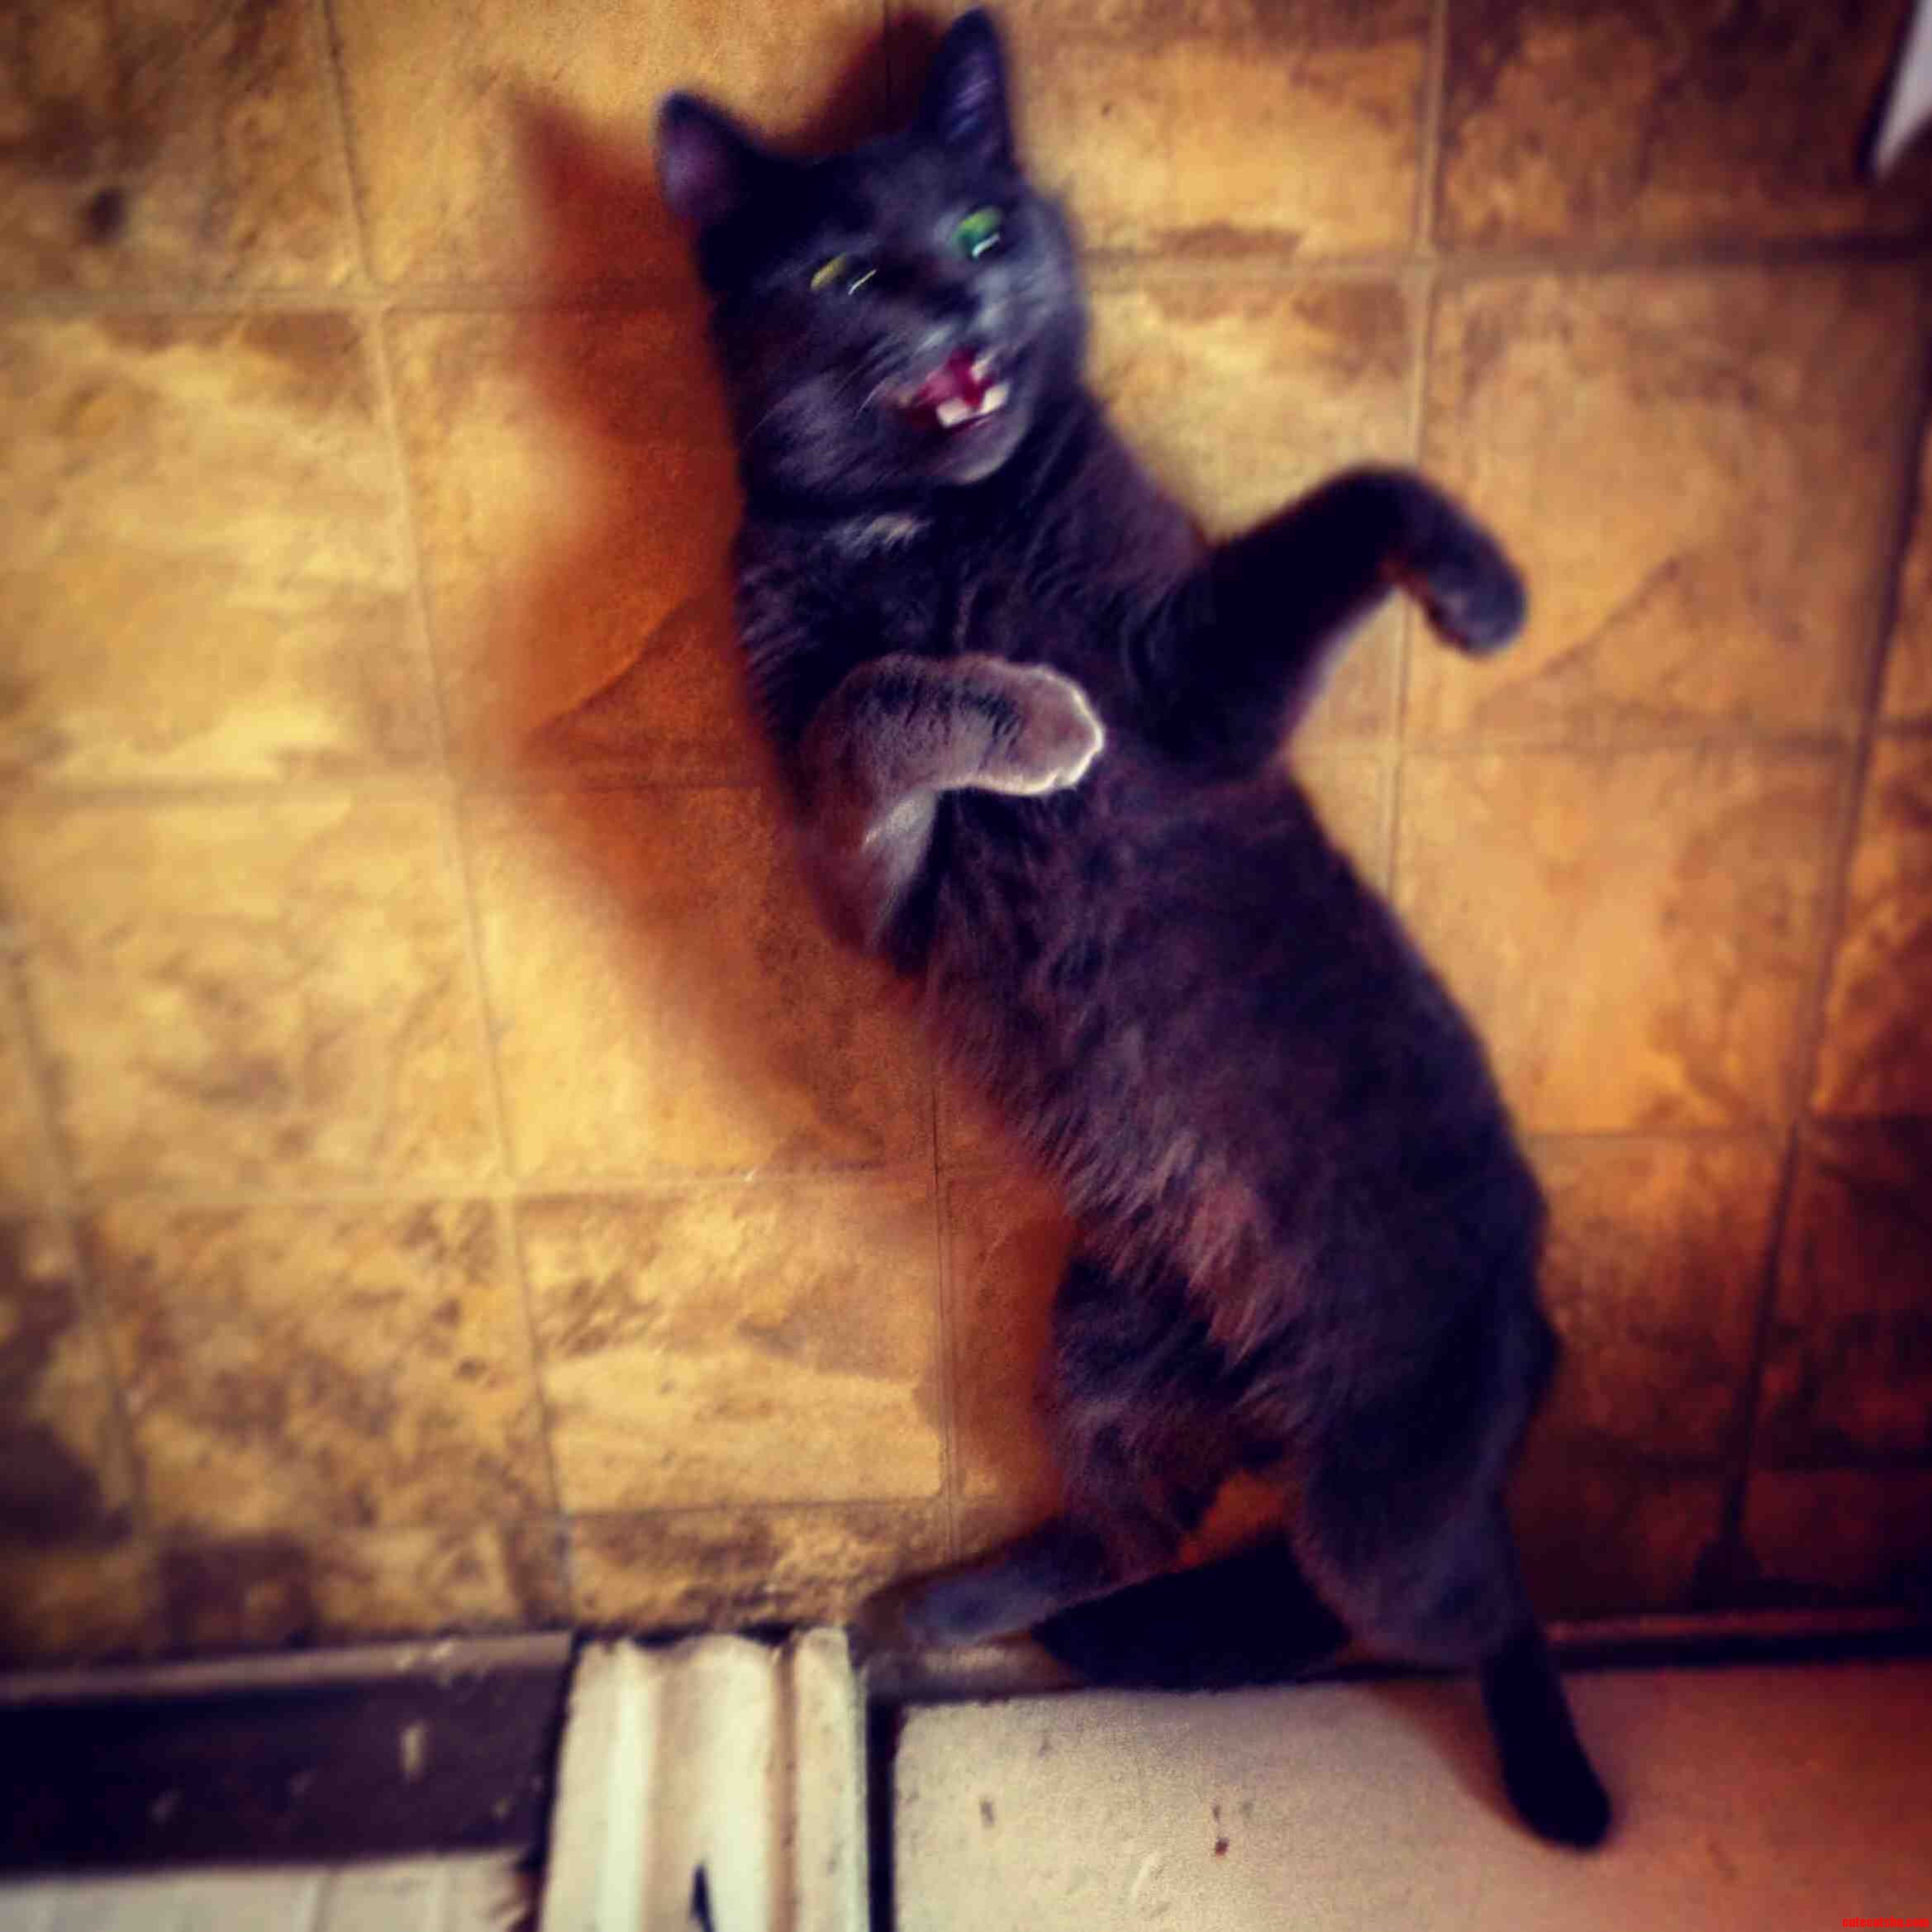 My Cat Likes To Do The Thriller